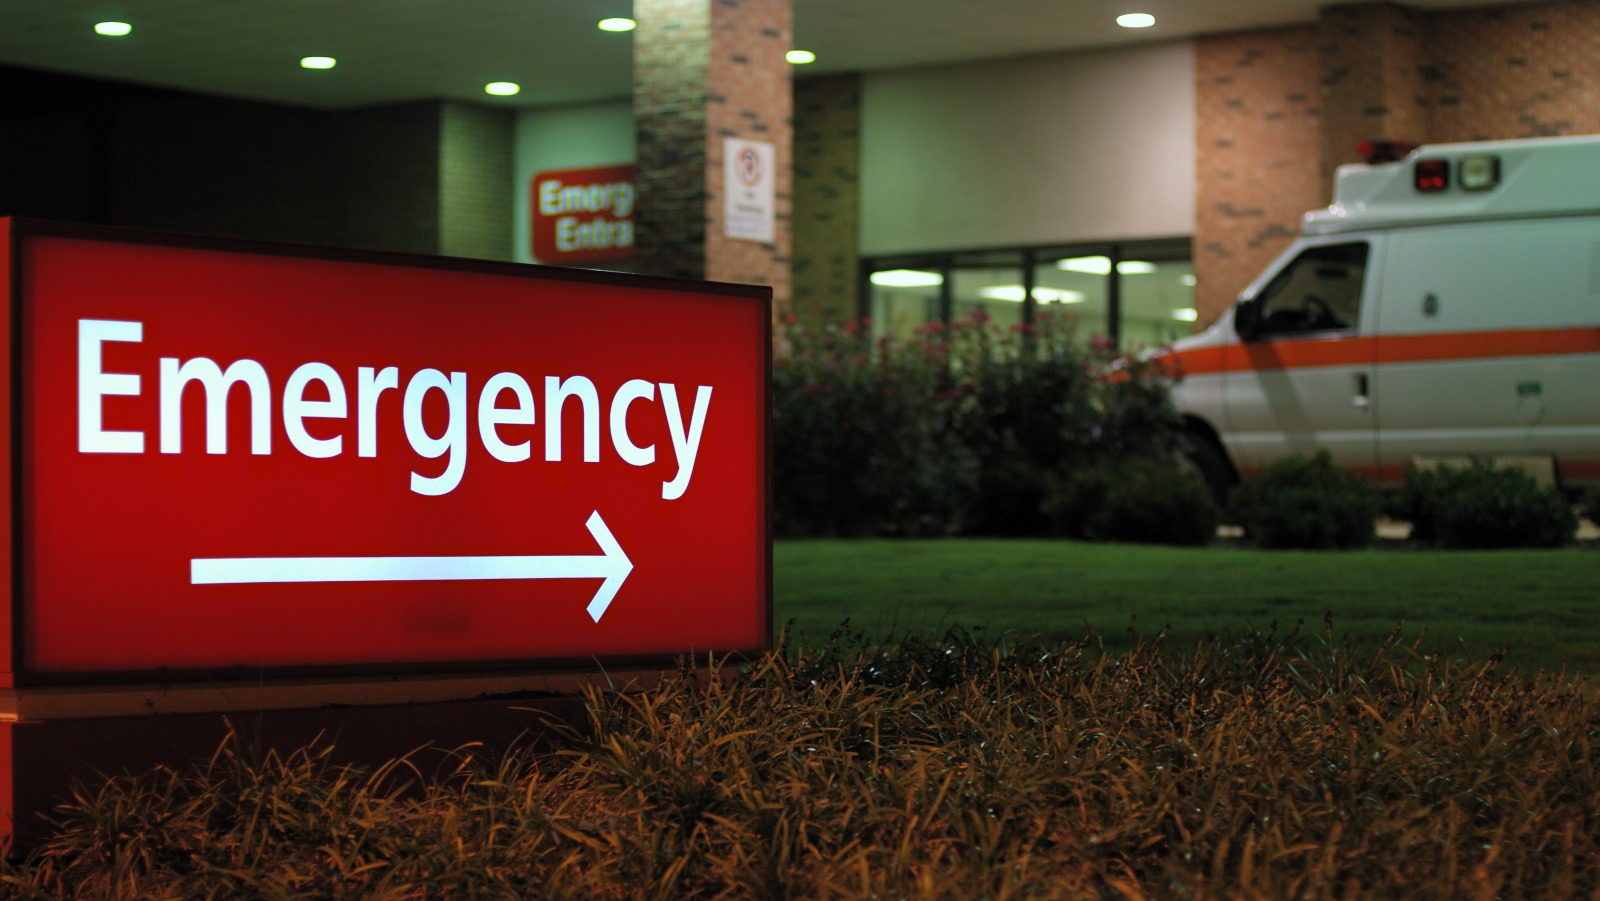 An emergency room entrance at night (Photo: Getty Images)